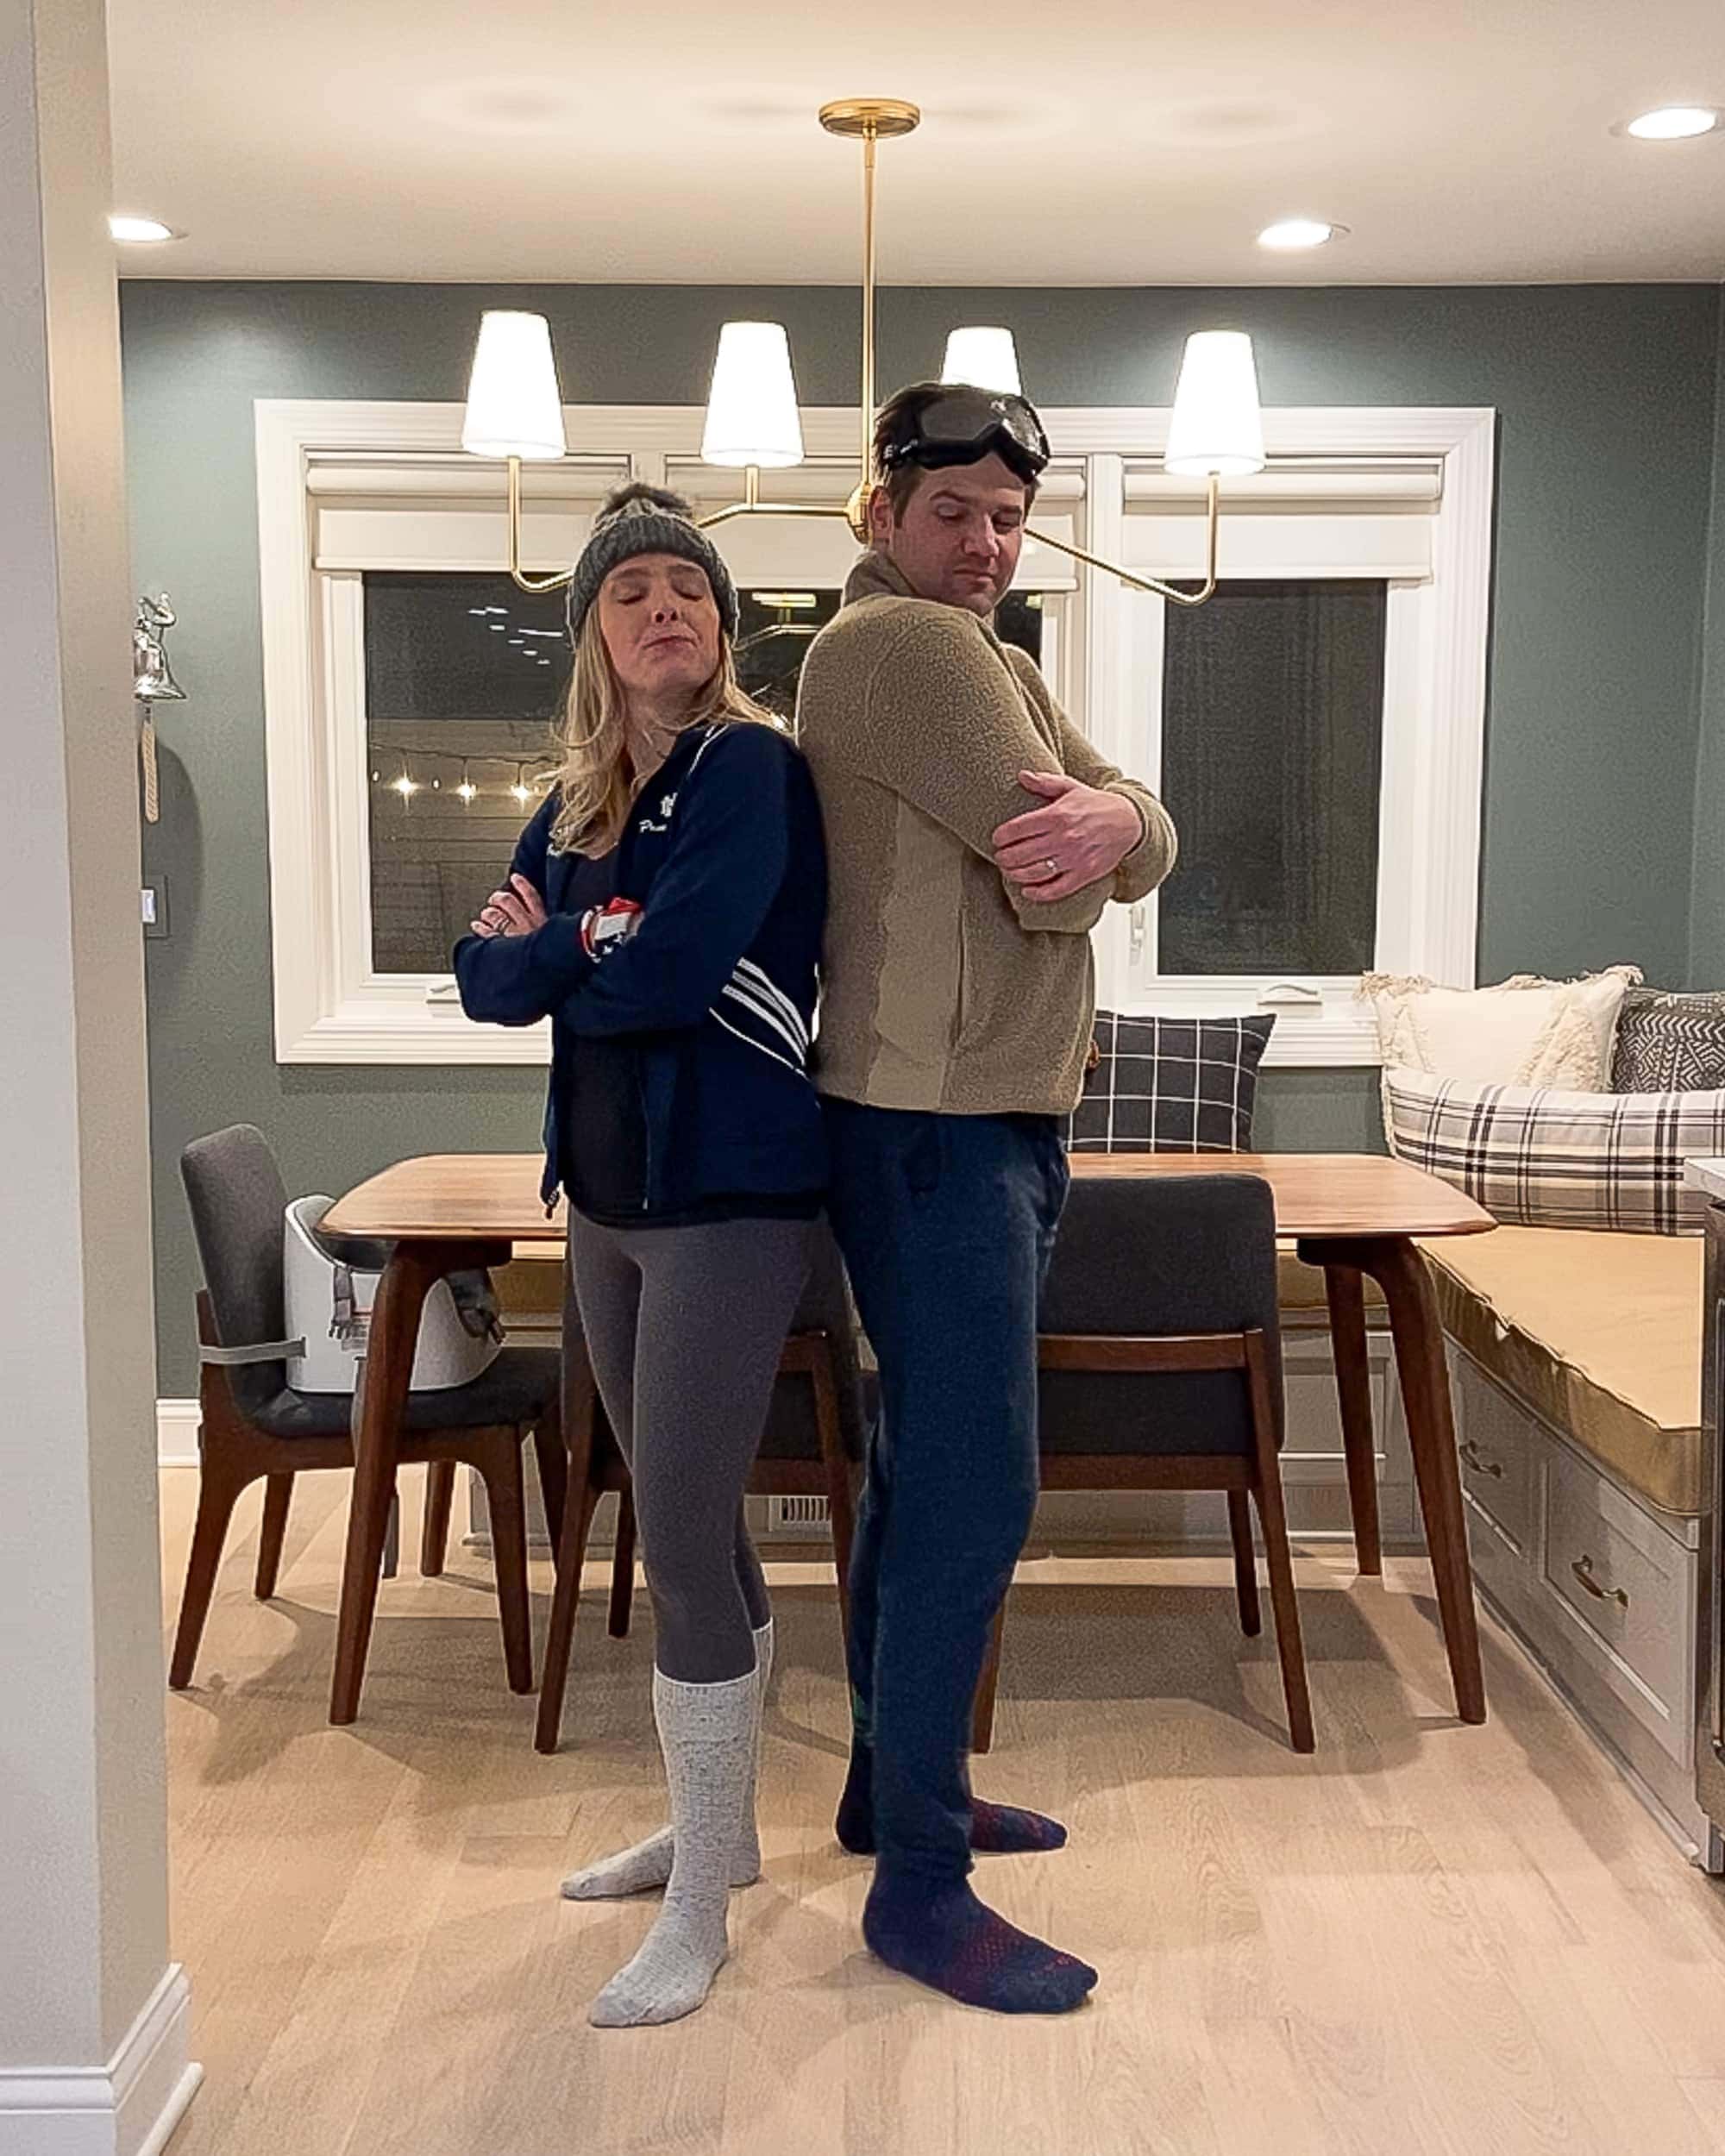 Our winter olympics date night in February 2022